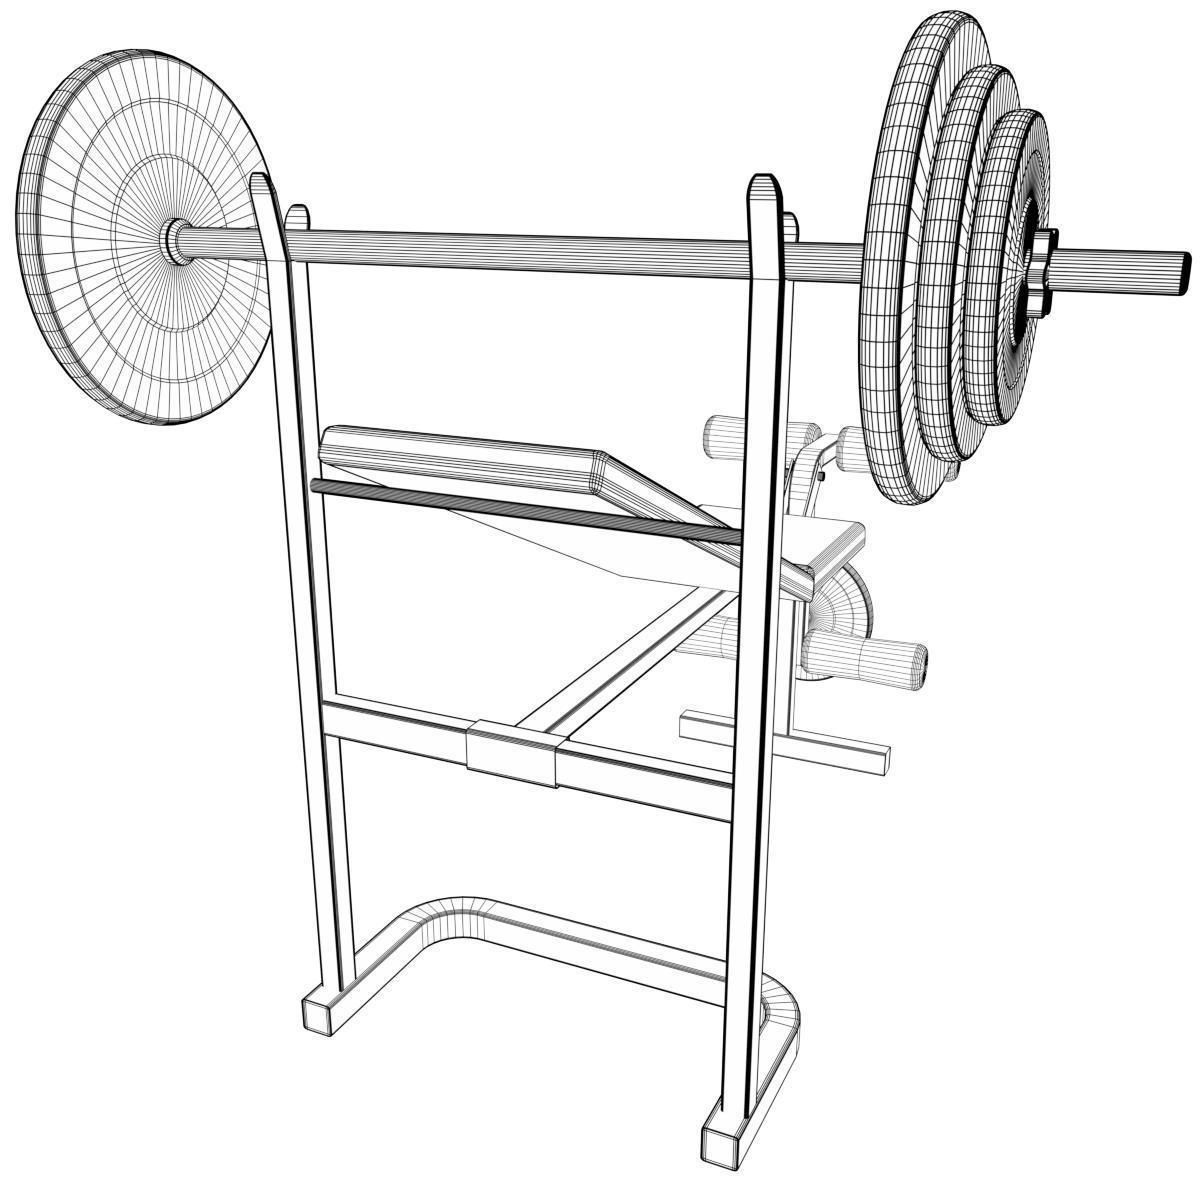 Gym Equipment Drawing at GetDrawings Free download